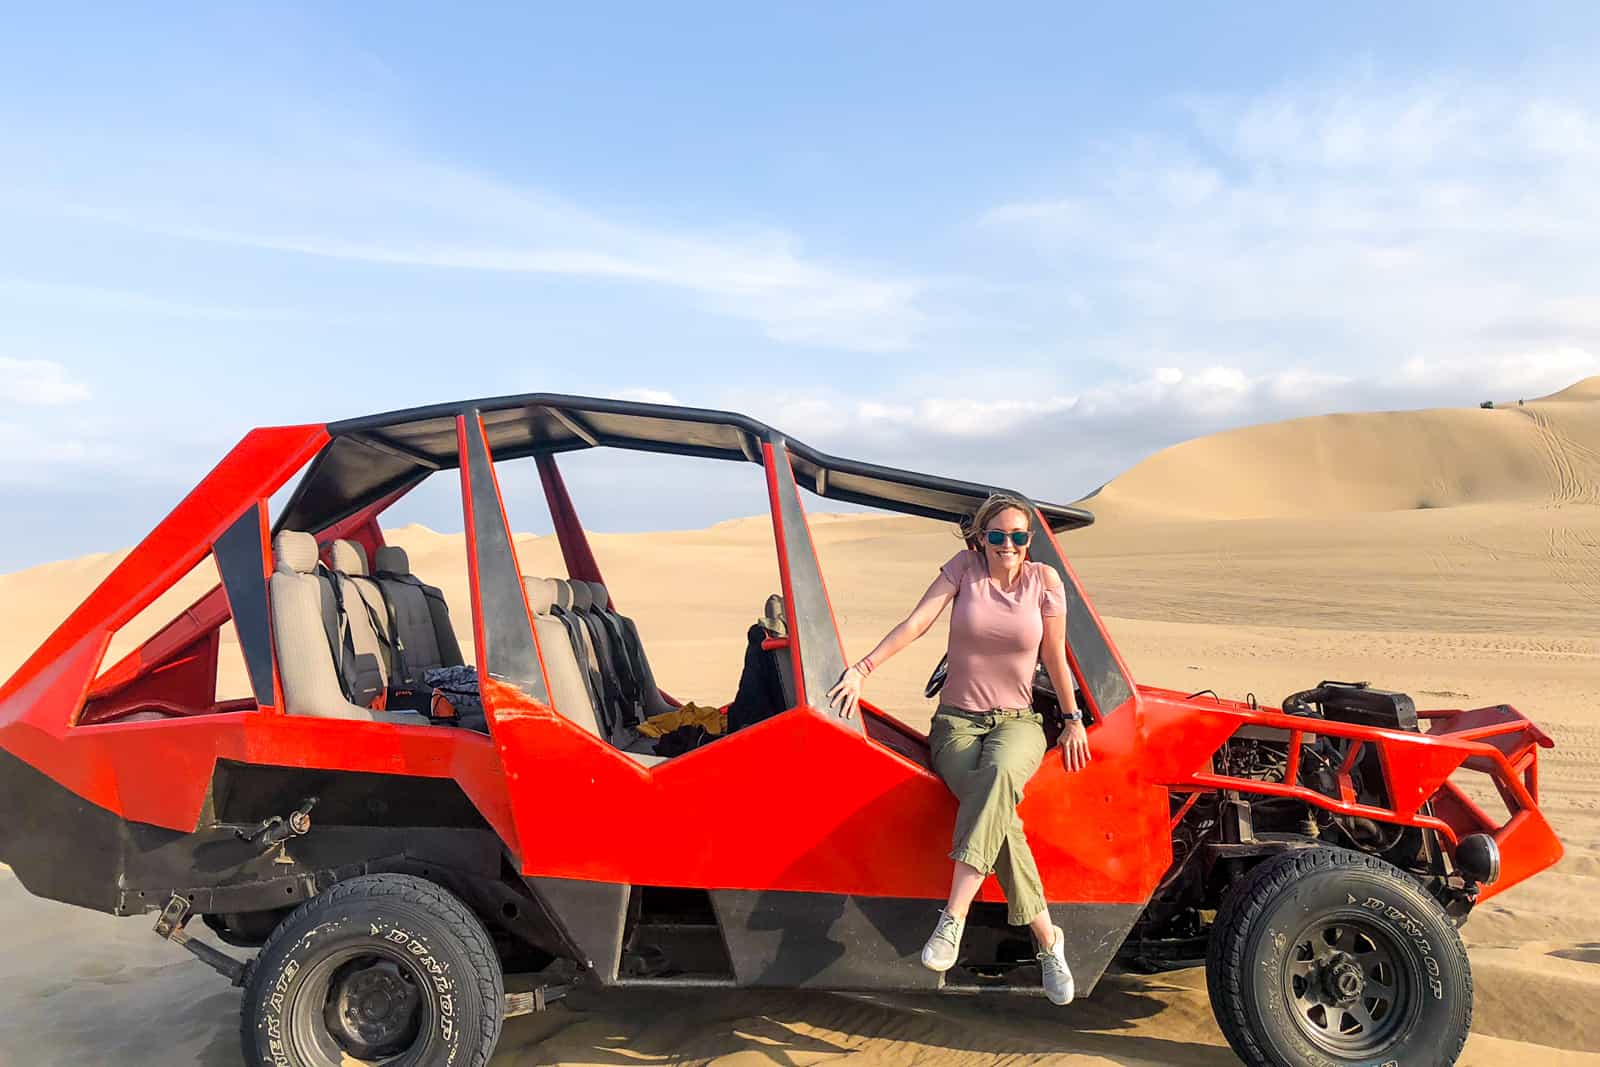 A woman sits on the red Sandbuggy parked on the Huacachina sand dunes in Peru.